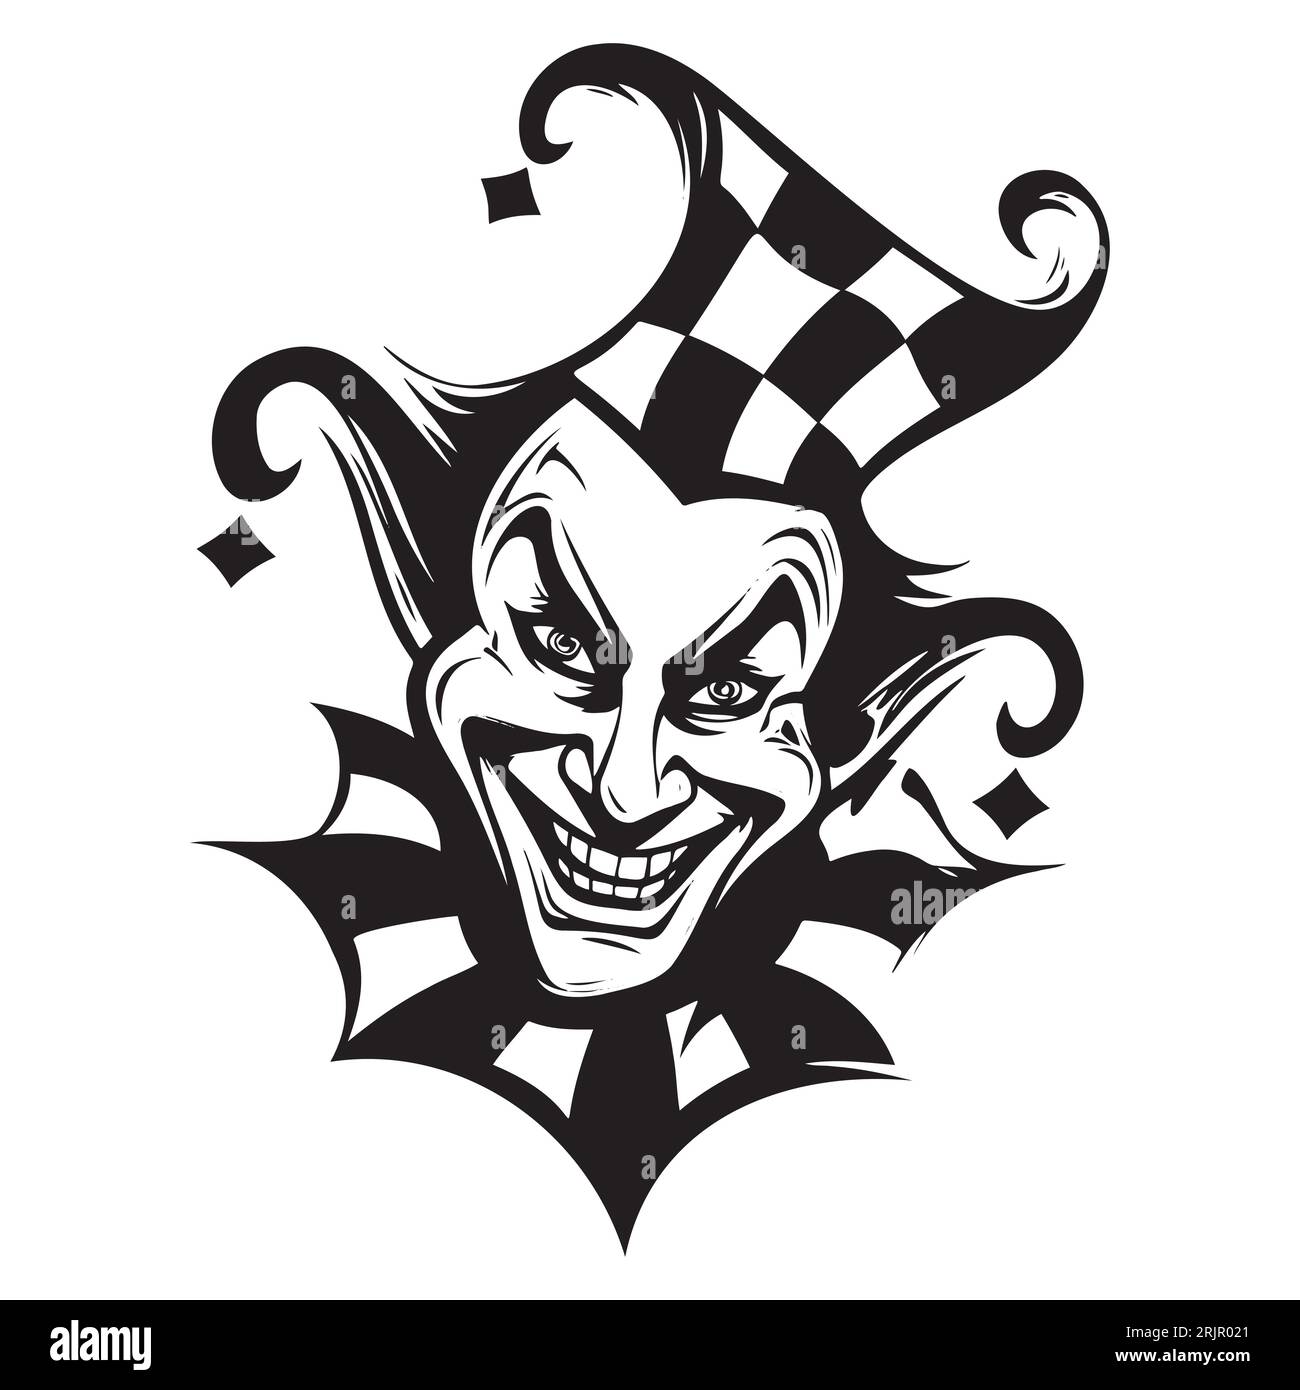 A black icon of the joker, in a white isolated vector illustration, embodies the playful and fun nature of the clown. With its whimsical design and Stock Vector